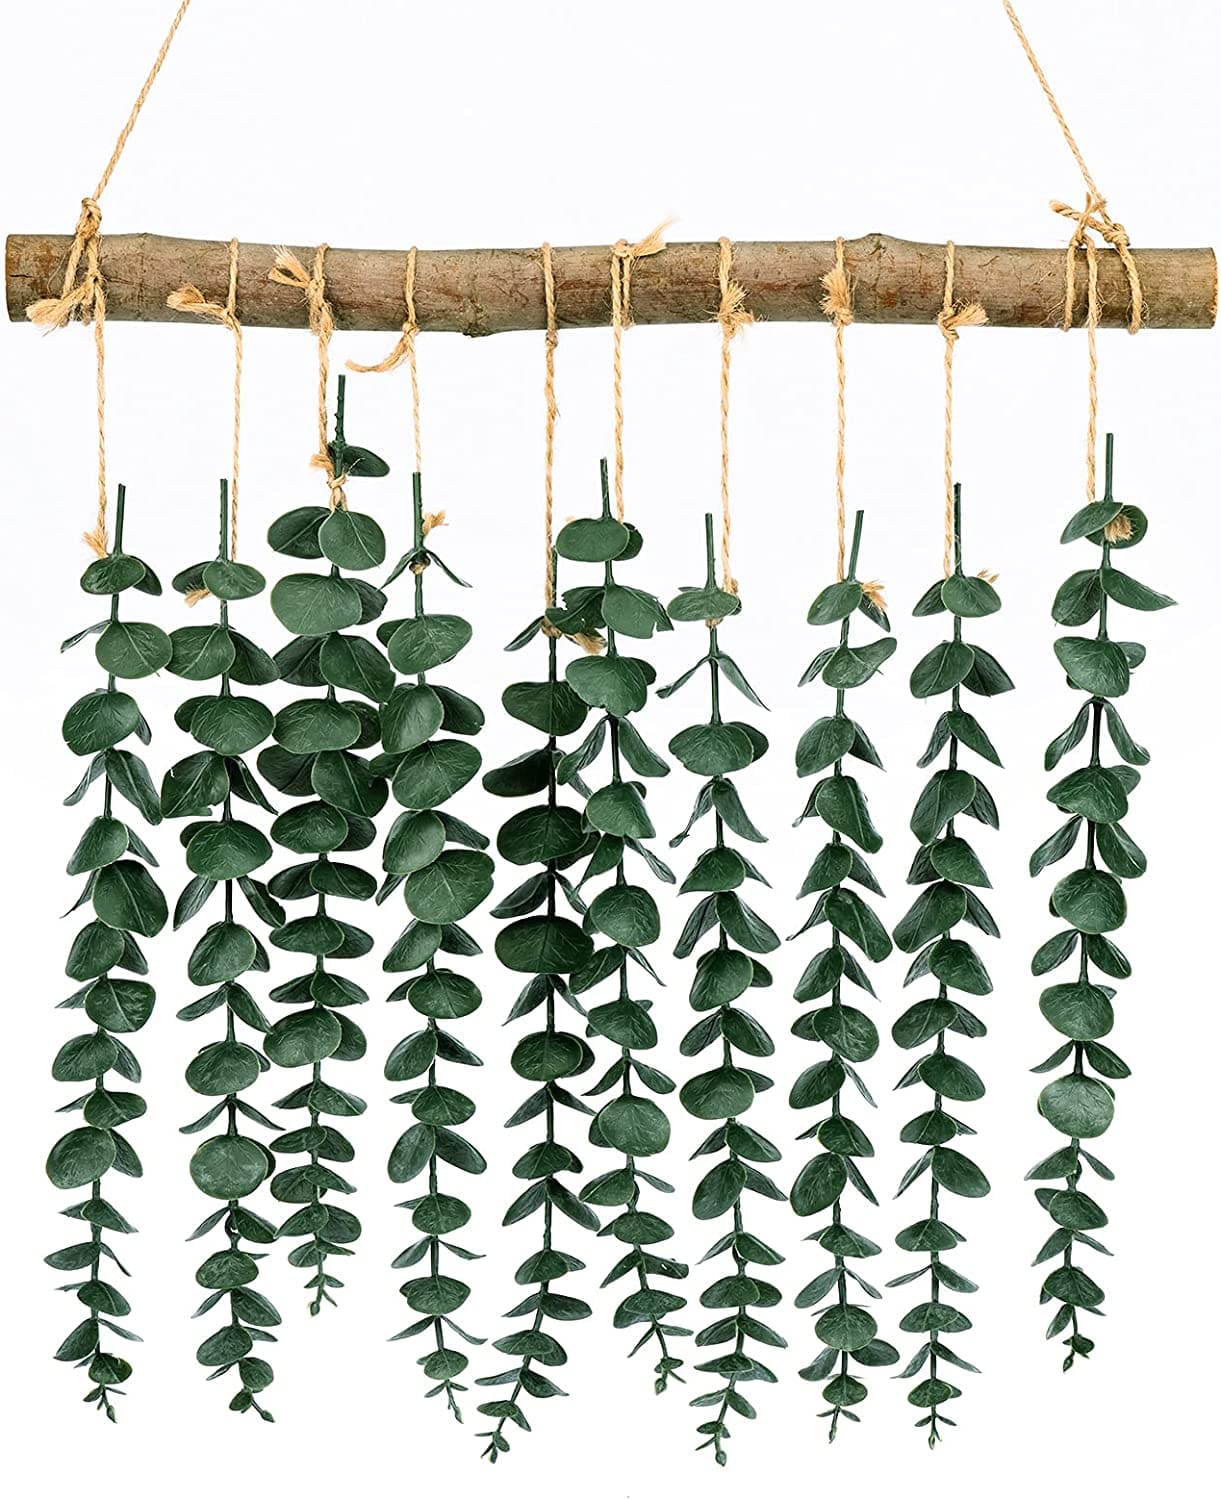 Artificial Eucalyptus Wall Hanging Decor, Greenery Plants for Boho Home, Bedroom, Bathroom, Nursery, Living Room, Farmhouse Rustic, Fake Eucalyptus Decorations with Wooden Stick（Shipment from FBA) - Default Title - HomeRelaxOfficial